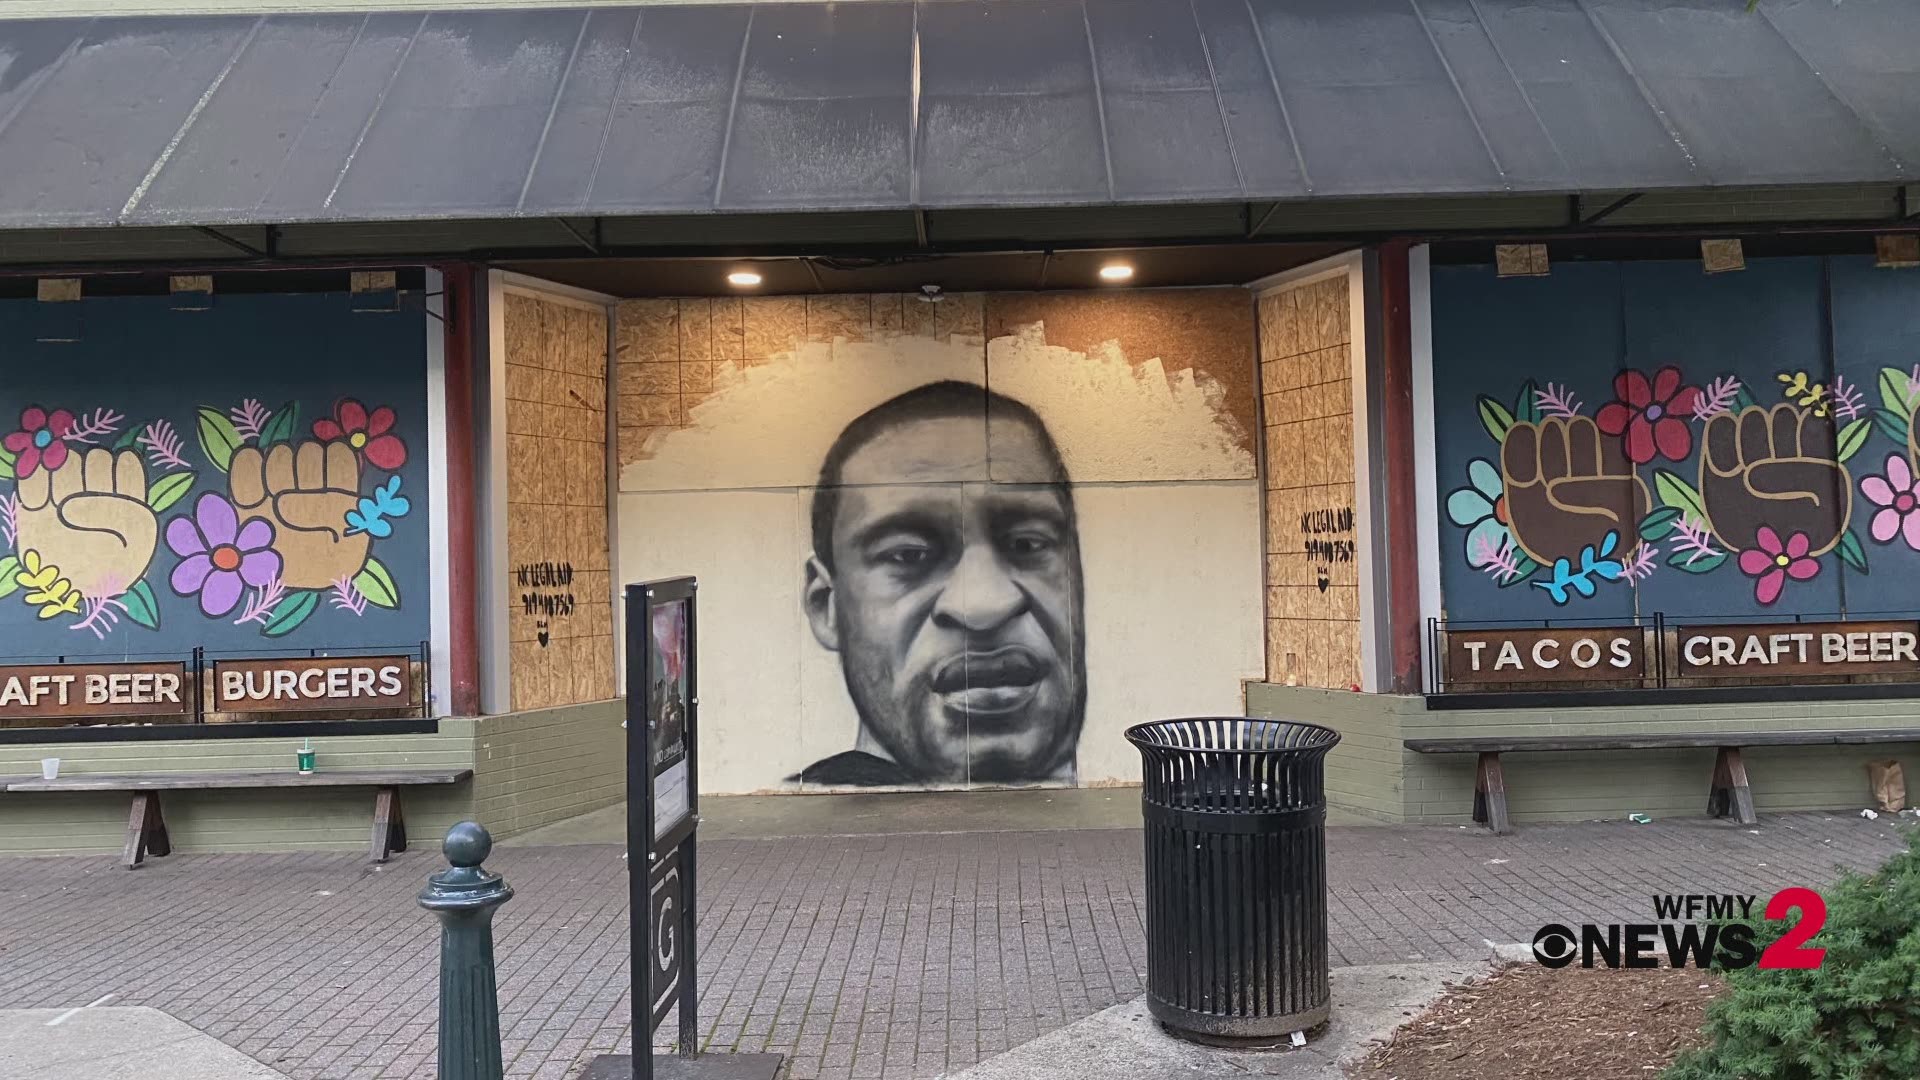 Downtown Greensboro storefronts have transformed into a working piece of art as part of nationwide protests for justice and equity